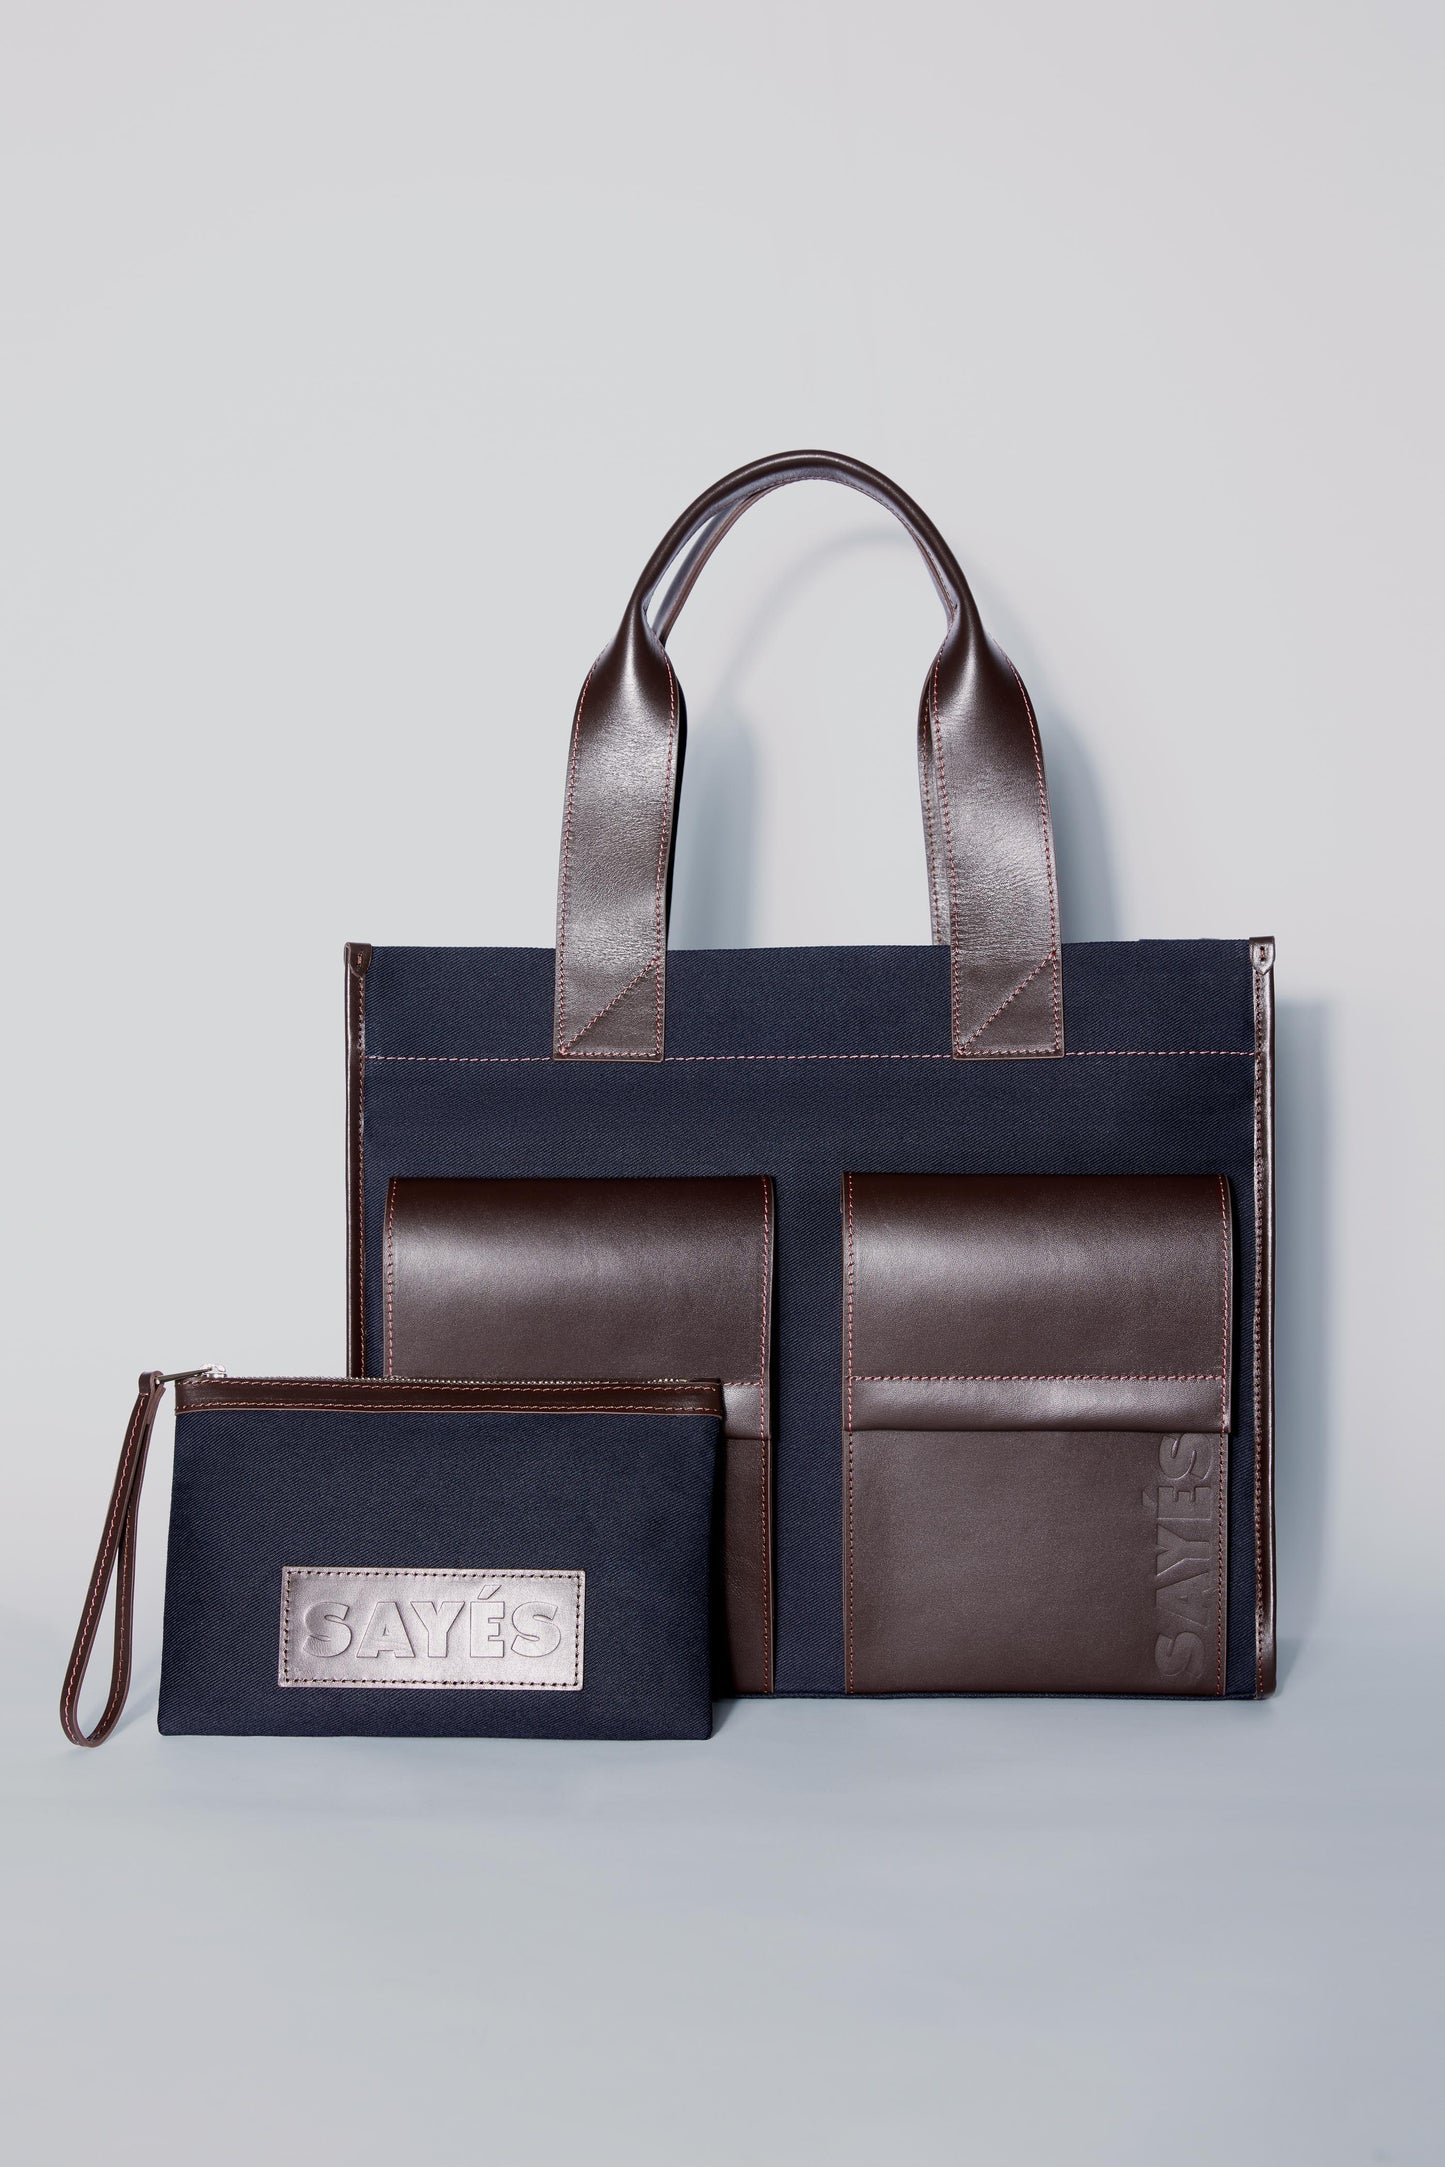 STITCHED POCKET MAXI TOTE BAG IN NAVY AND BROWN